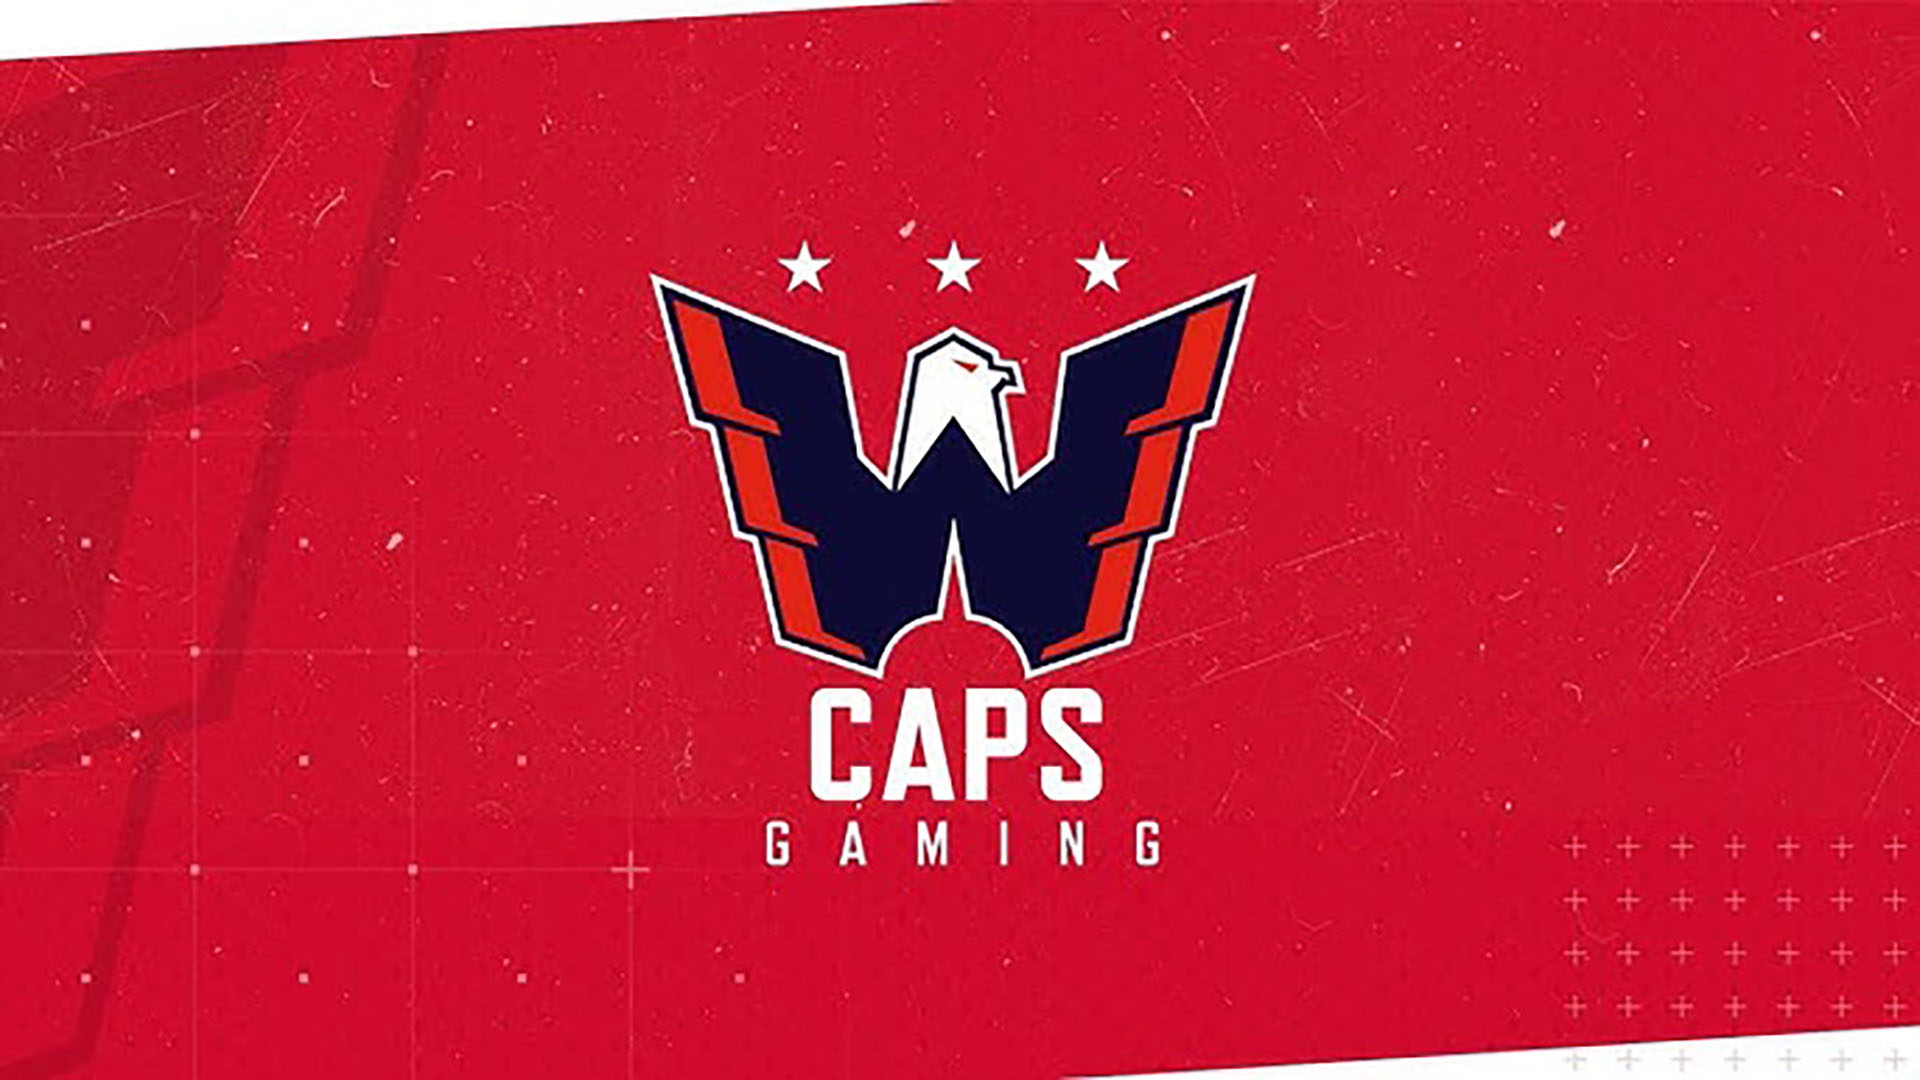 Caps Gaming announces LAN event as part of 2023/24 esports plans